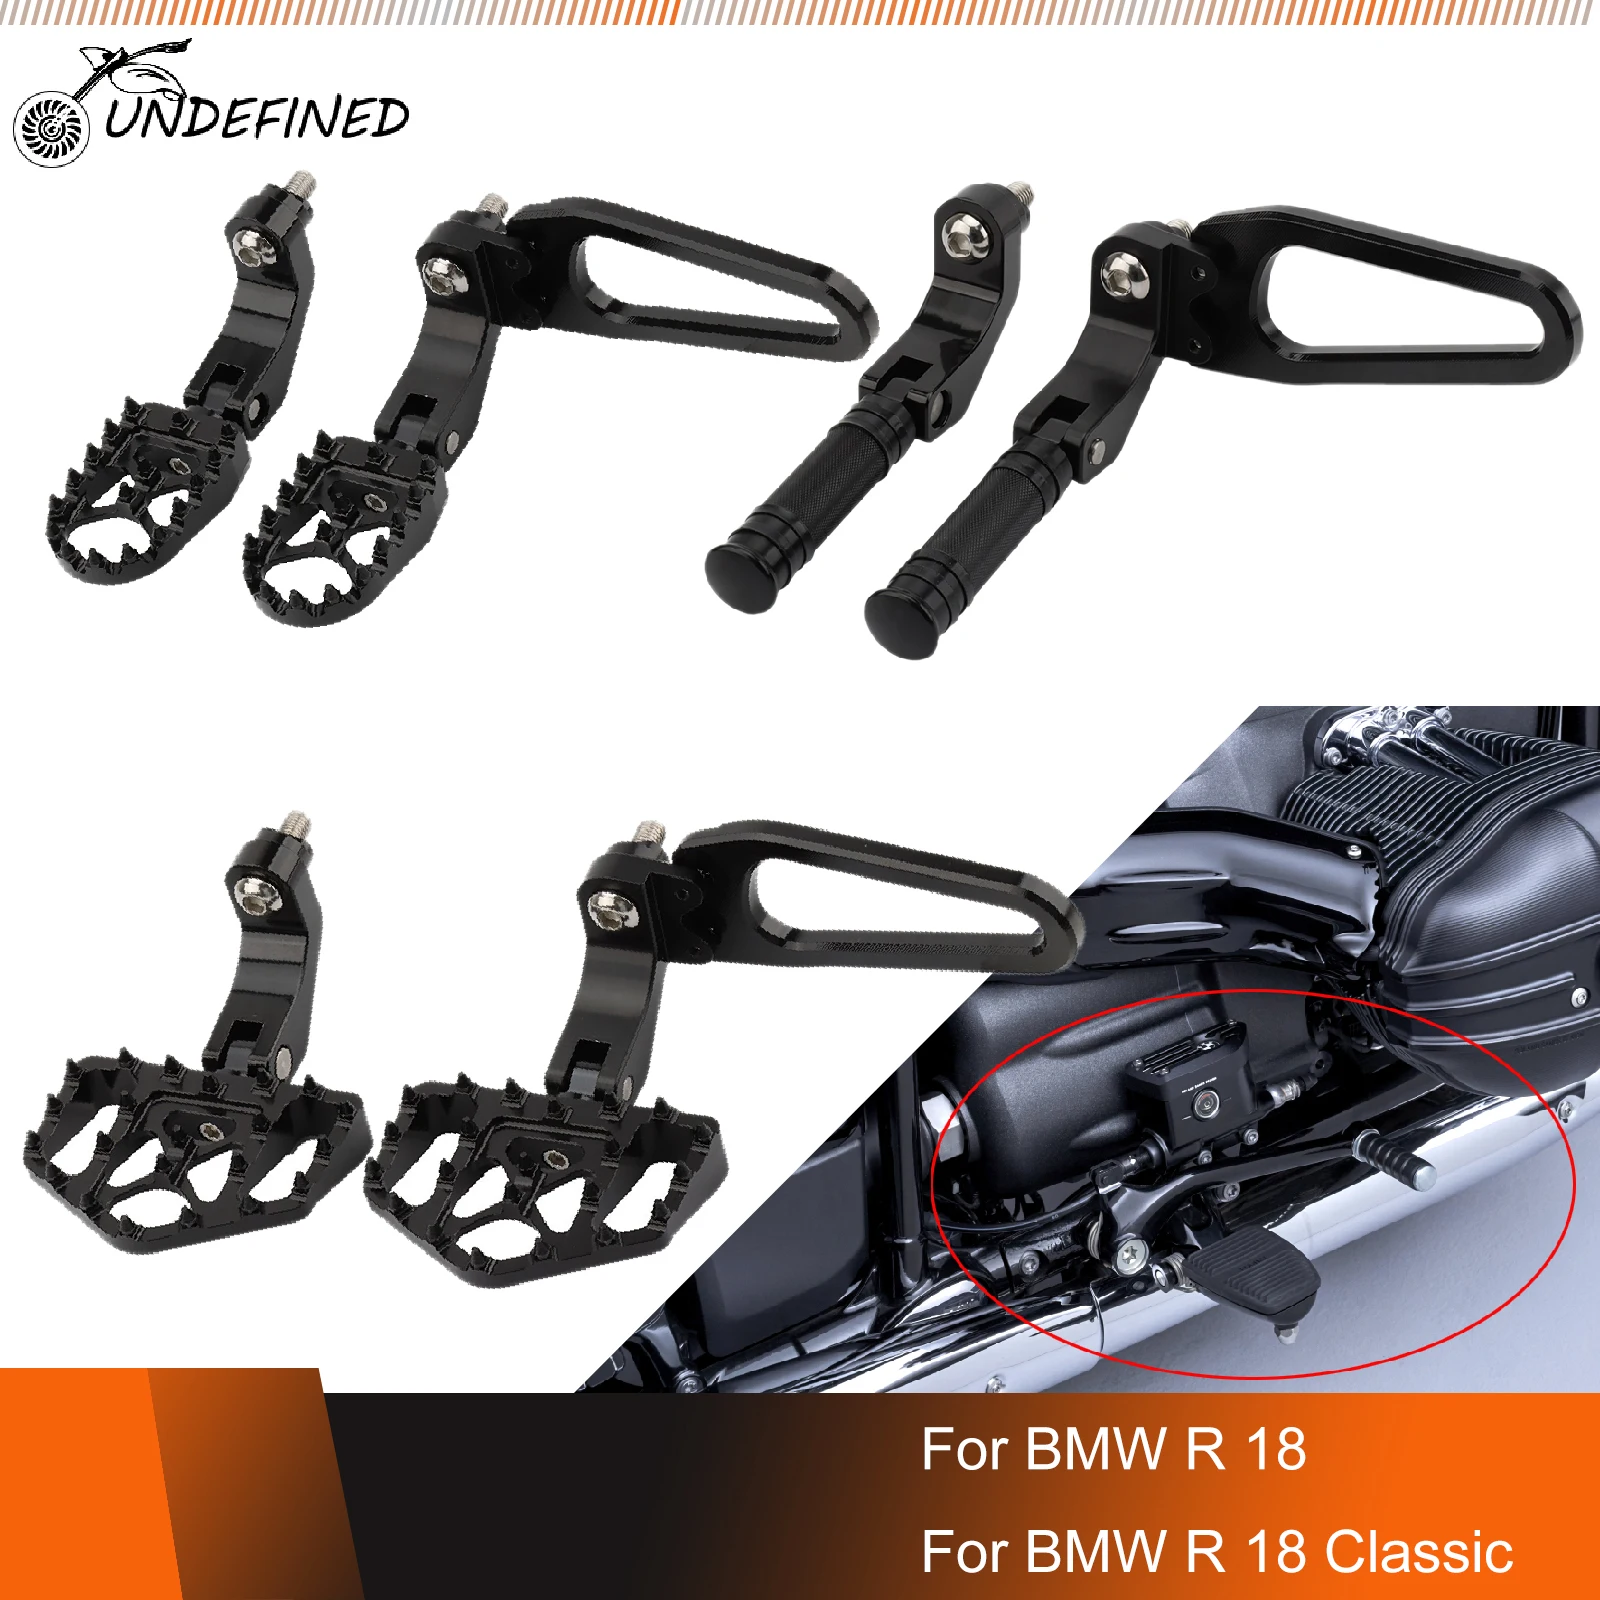 

For BMW R18 Rear Foot Pegs Rest Floorboards Motorcycle Passenger Wide Fat Footpegs Pedals Supports Mount Kits R 18 Classic 2020